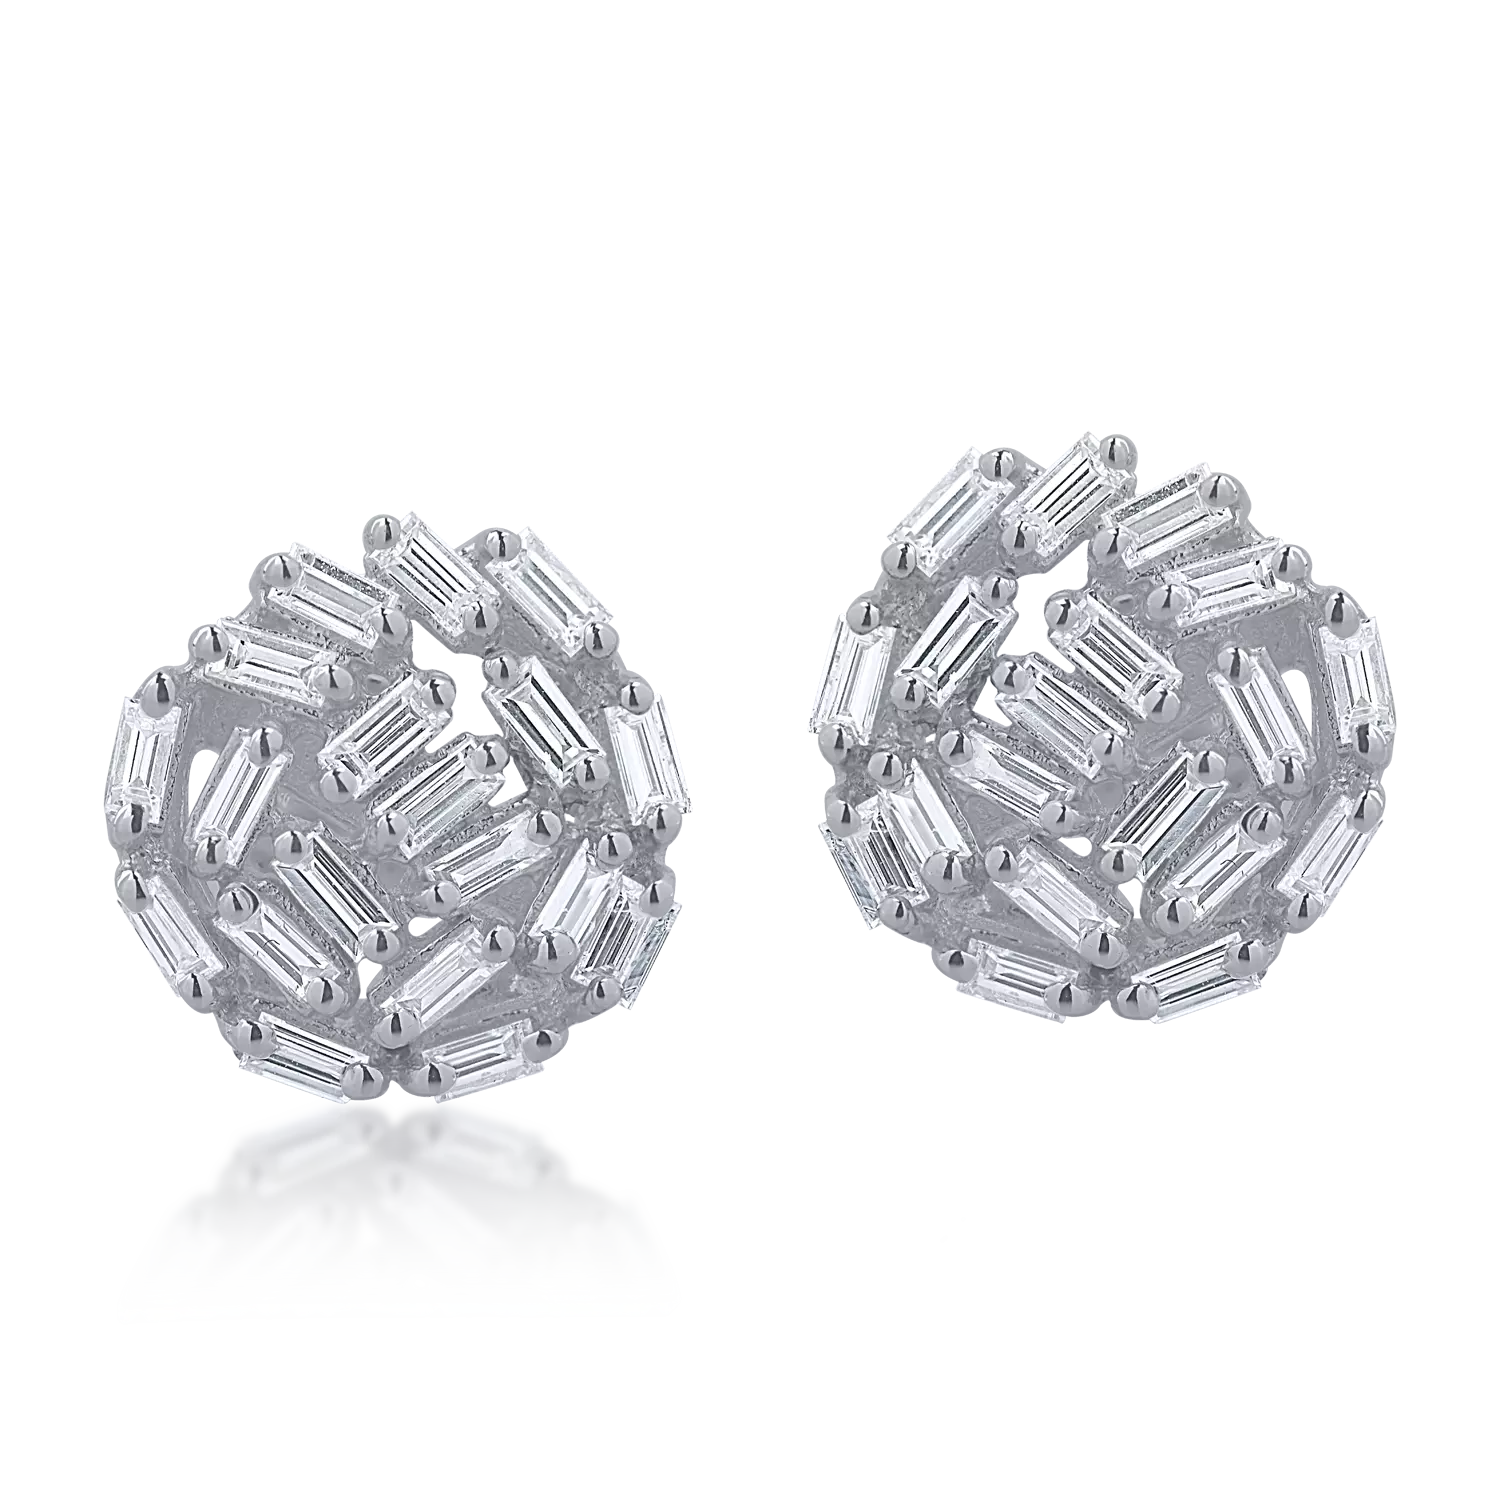 White gold earrings with 0.62ct diamonds